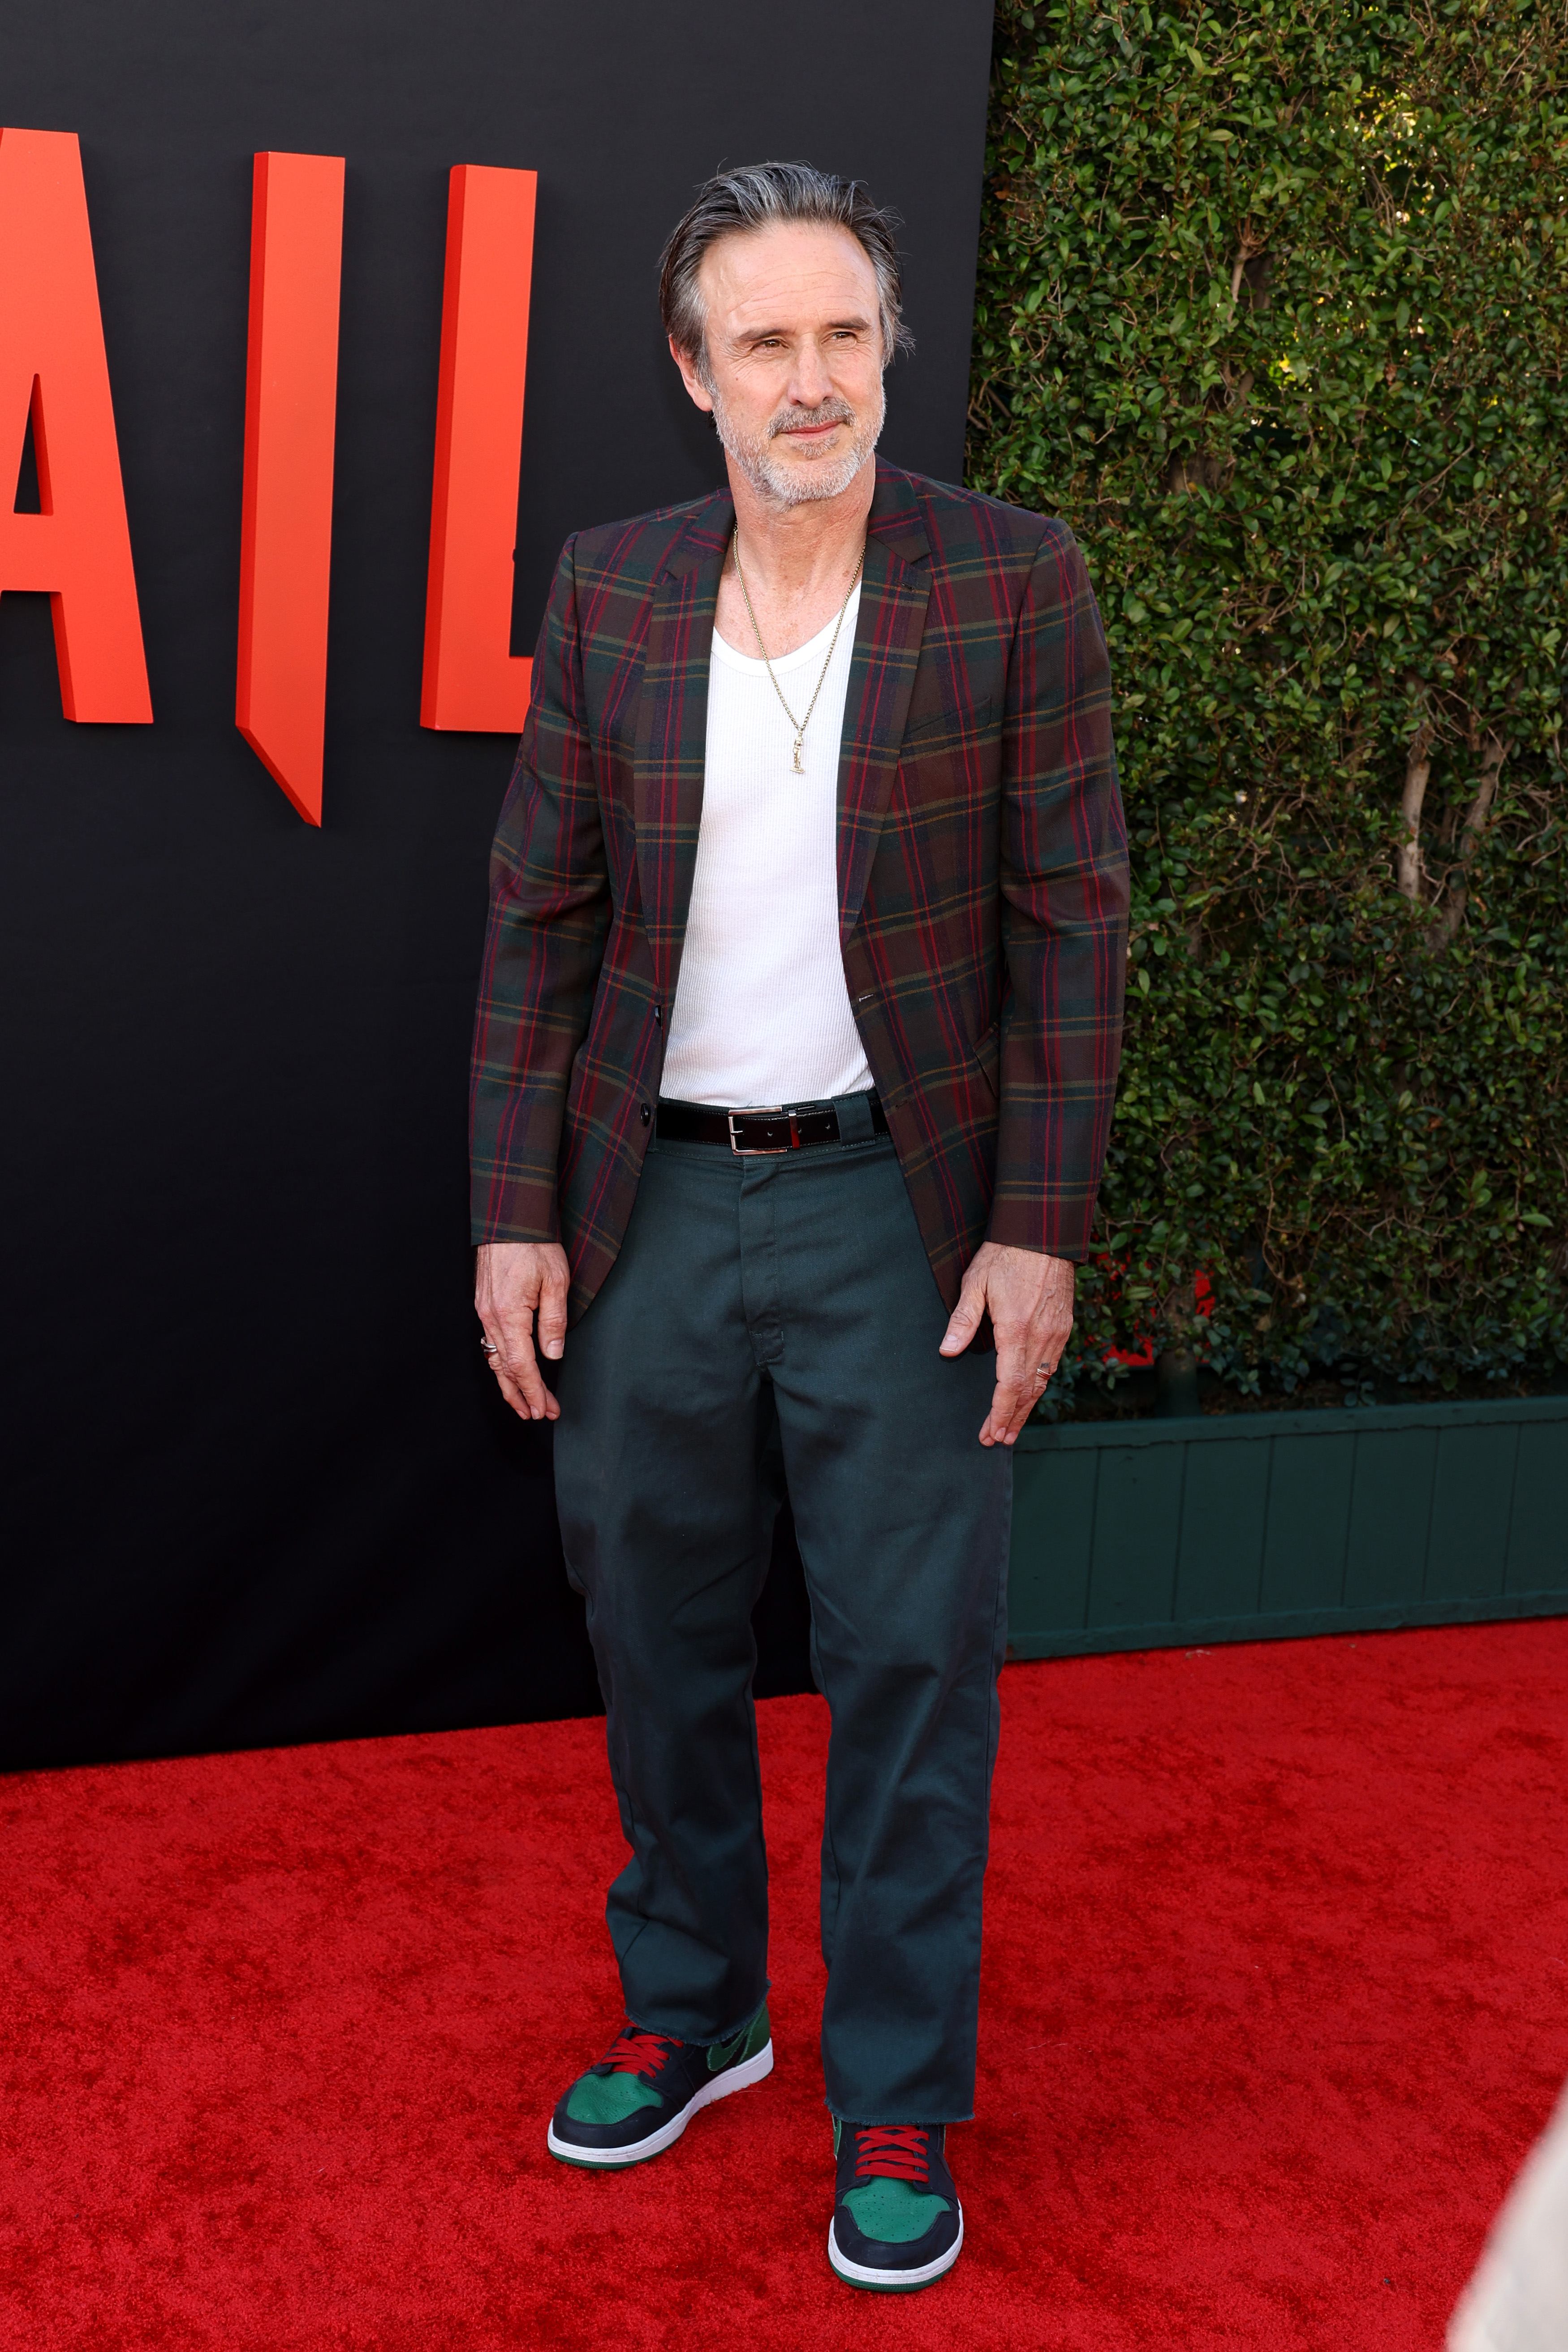 The actor showed off his style in slacks and a blazer